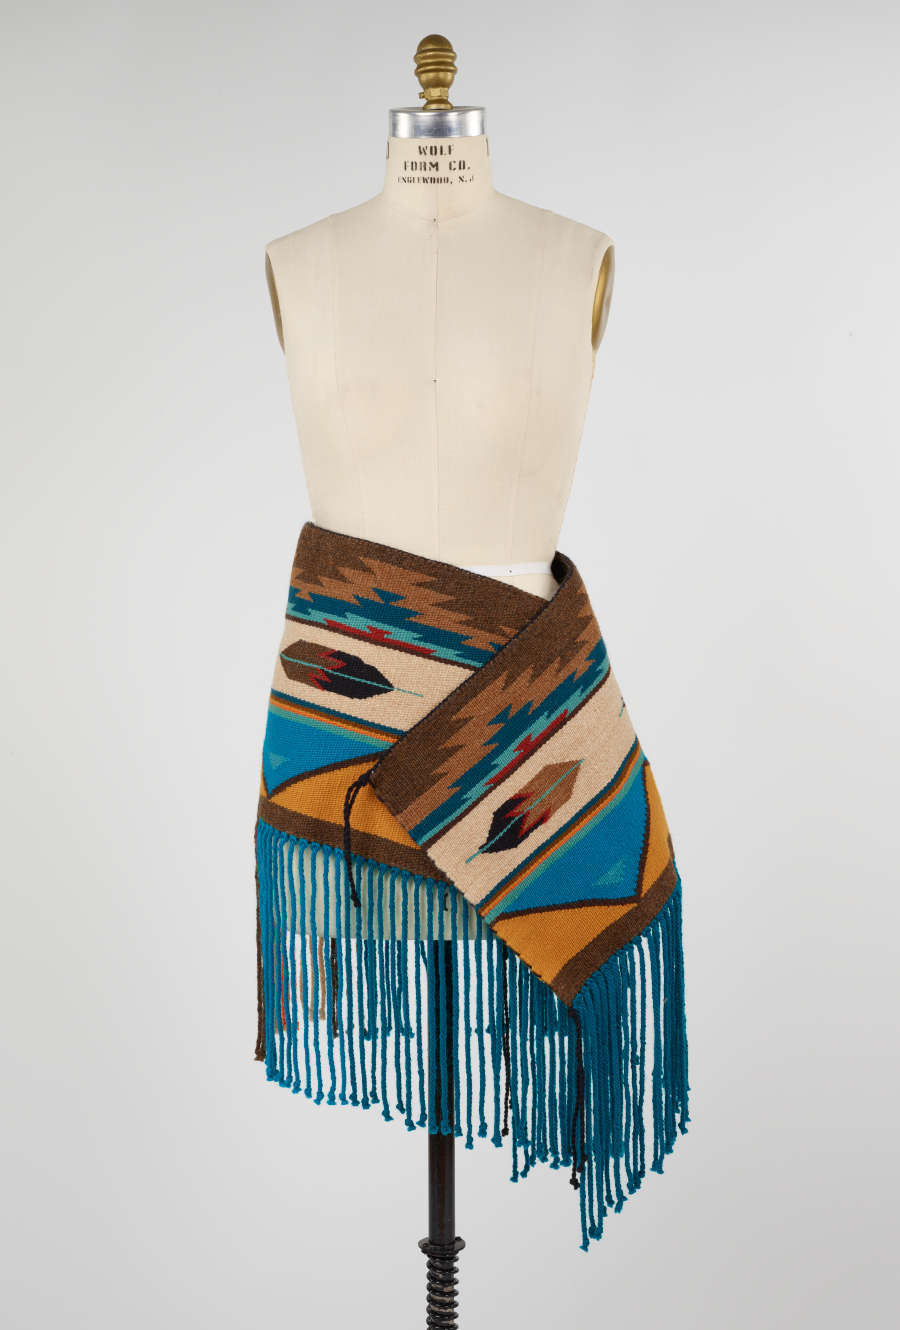 Turquoise, beige, and yellow geometric patterned woven fabric with fringe, wrapped around the hip of a mannequin. The turquoise fringed ends are the same length as the woven fabric. 